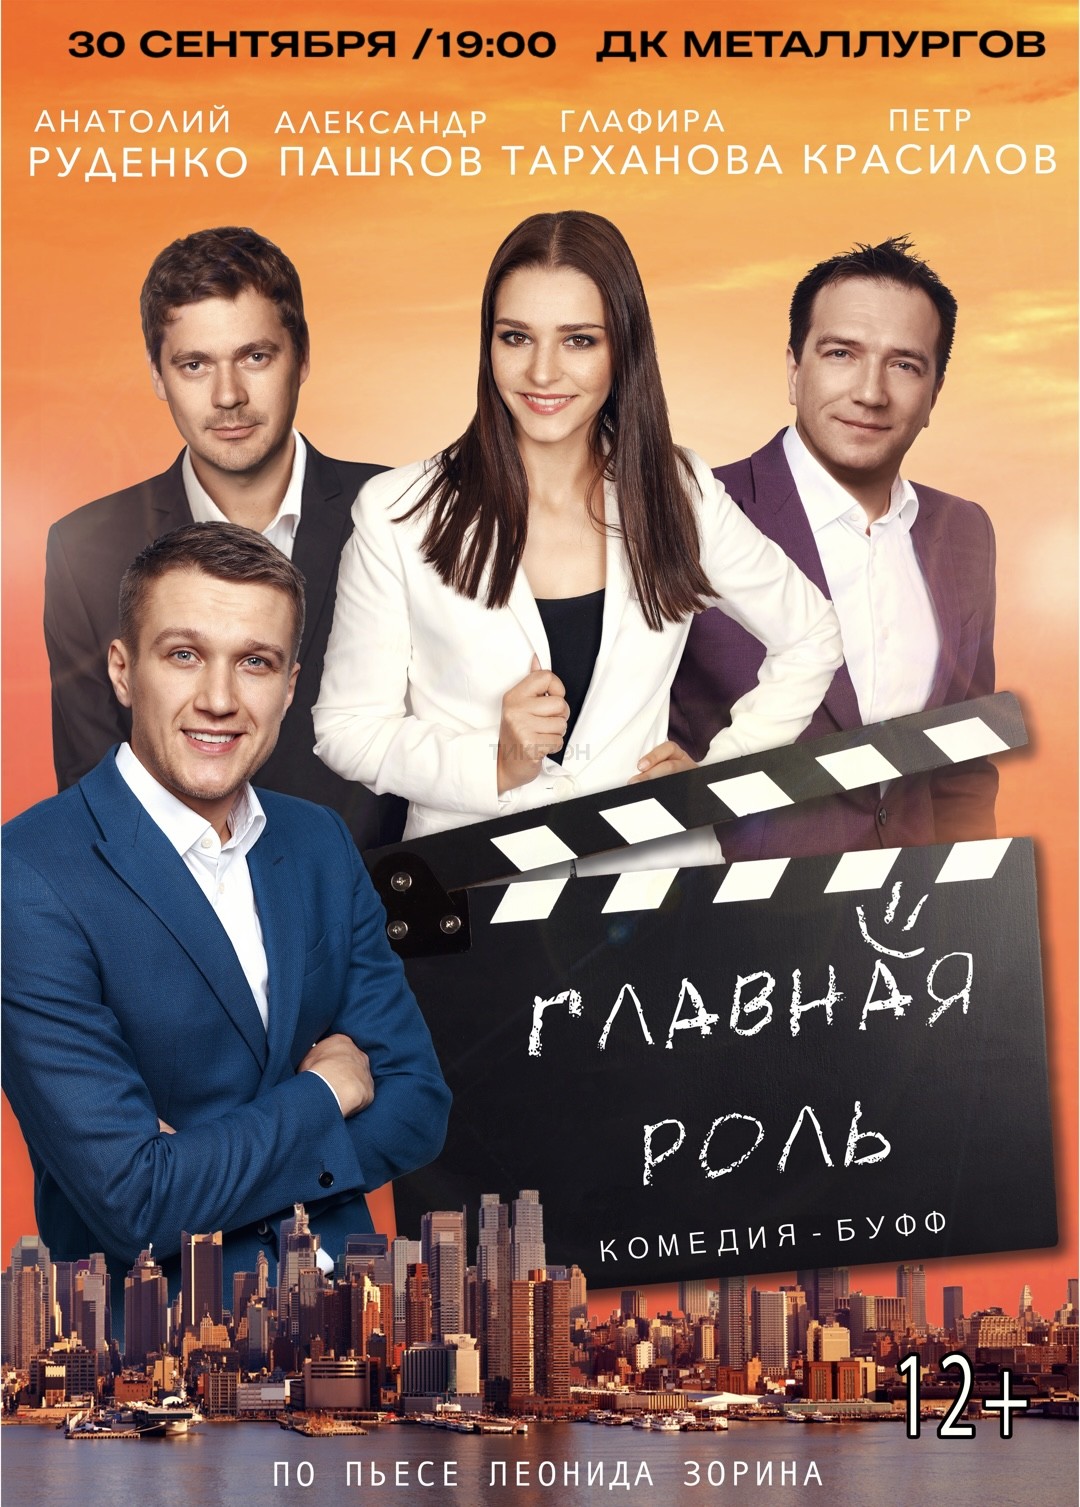 The play The main role in Ust-Kamenogorsk